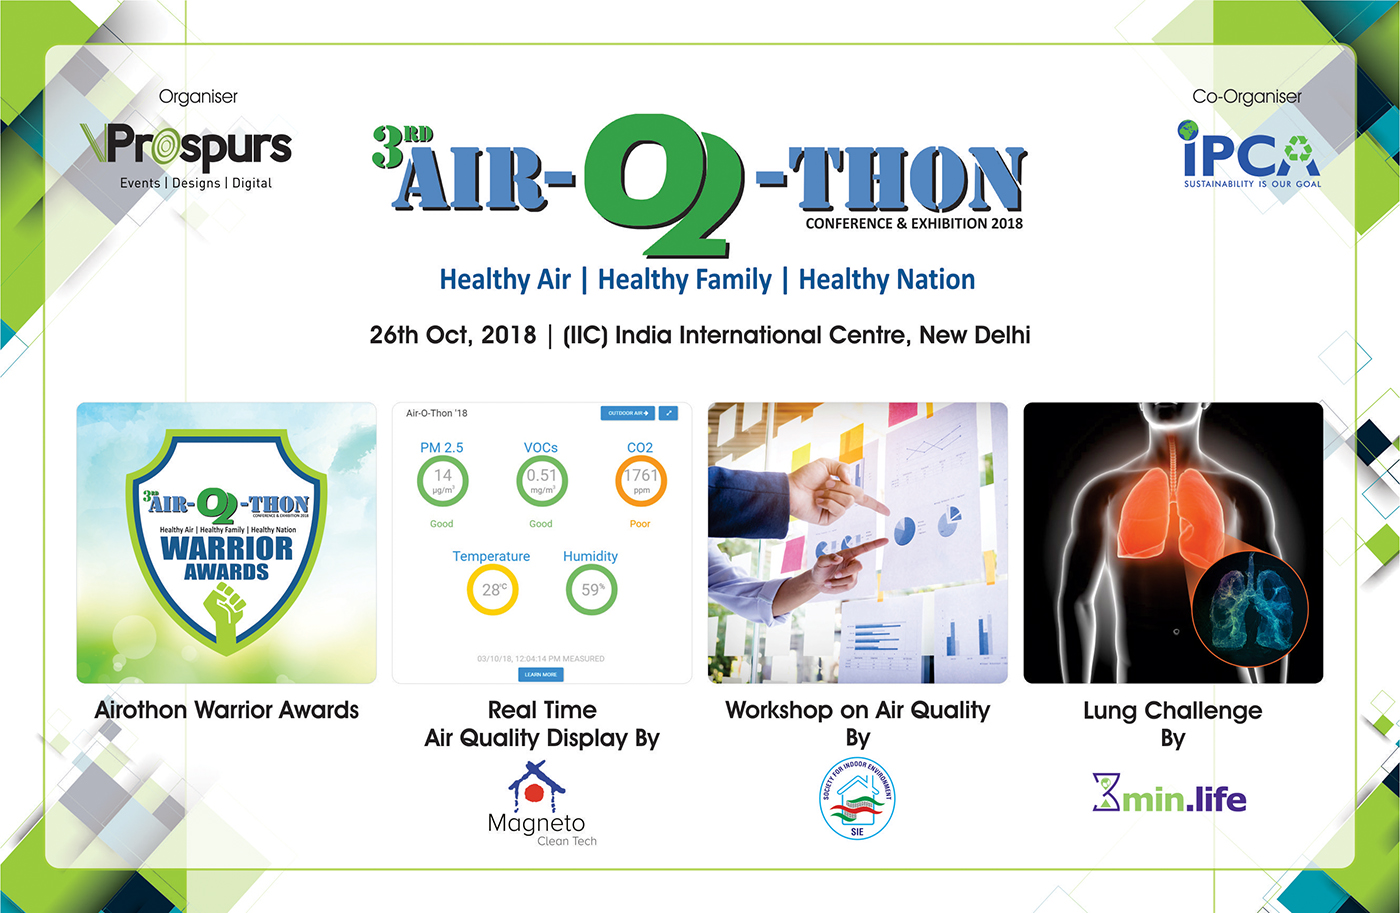 Third Edition of Air-O-Thon in New Delhi Organized by VProspurs and IPCA